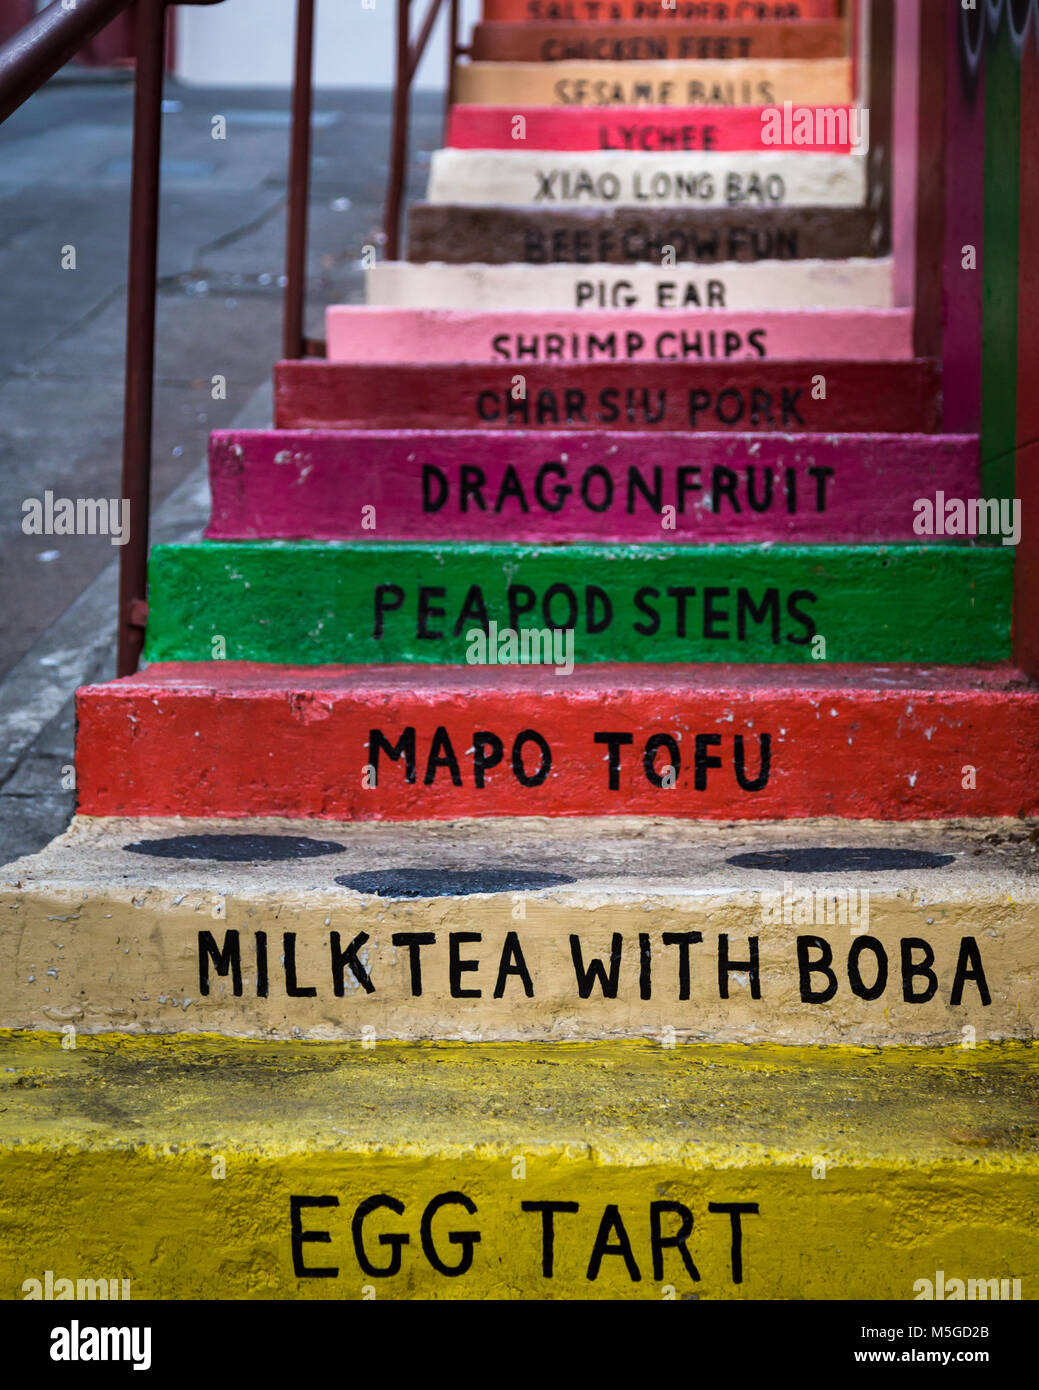 Menu of Chinese food painted onto steps outside a restaurant in Chinatown, San Francisco Stock Photo